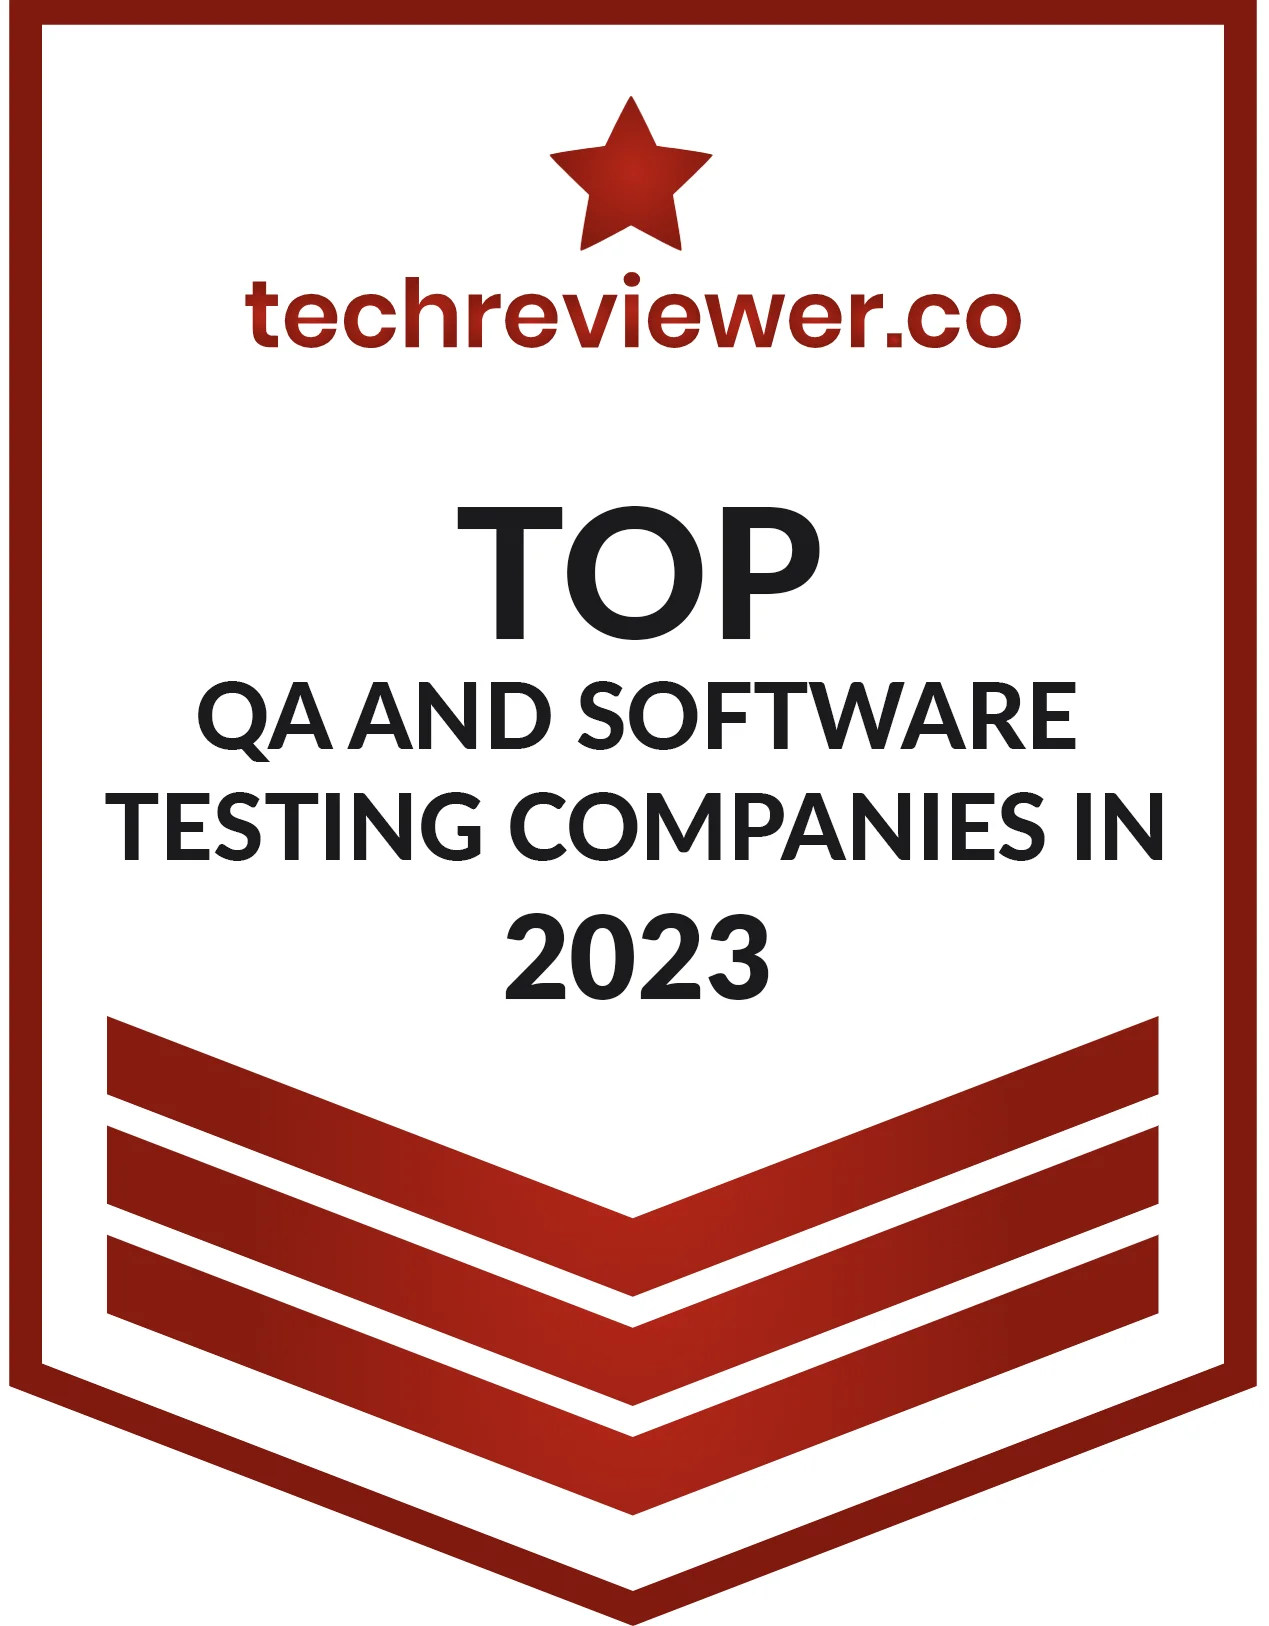 fulminous software Top QA and Software Testing Companies in 2023